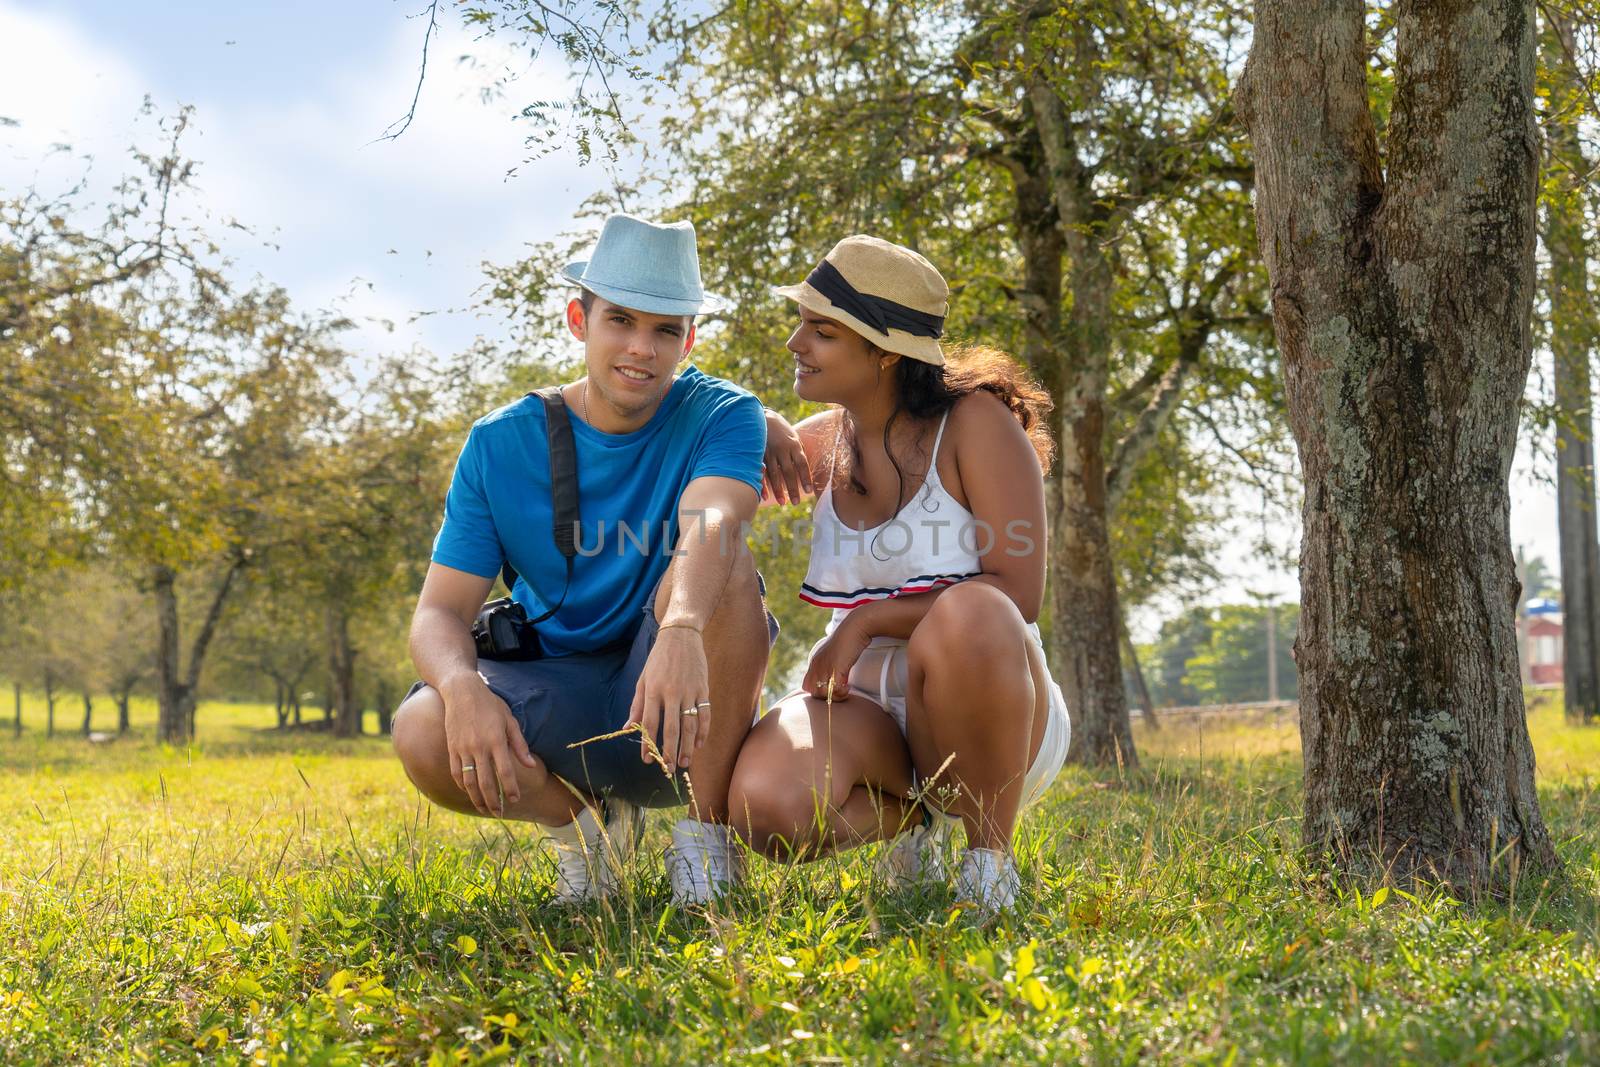 Couple of young people wearing hat crouching in a field with tamarind trees